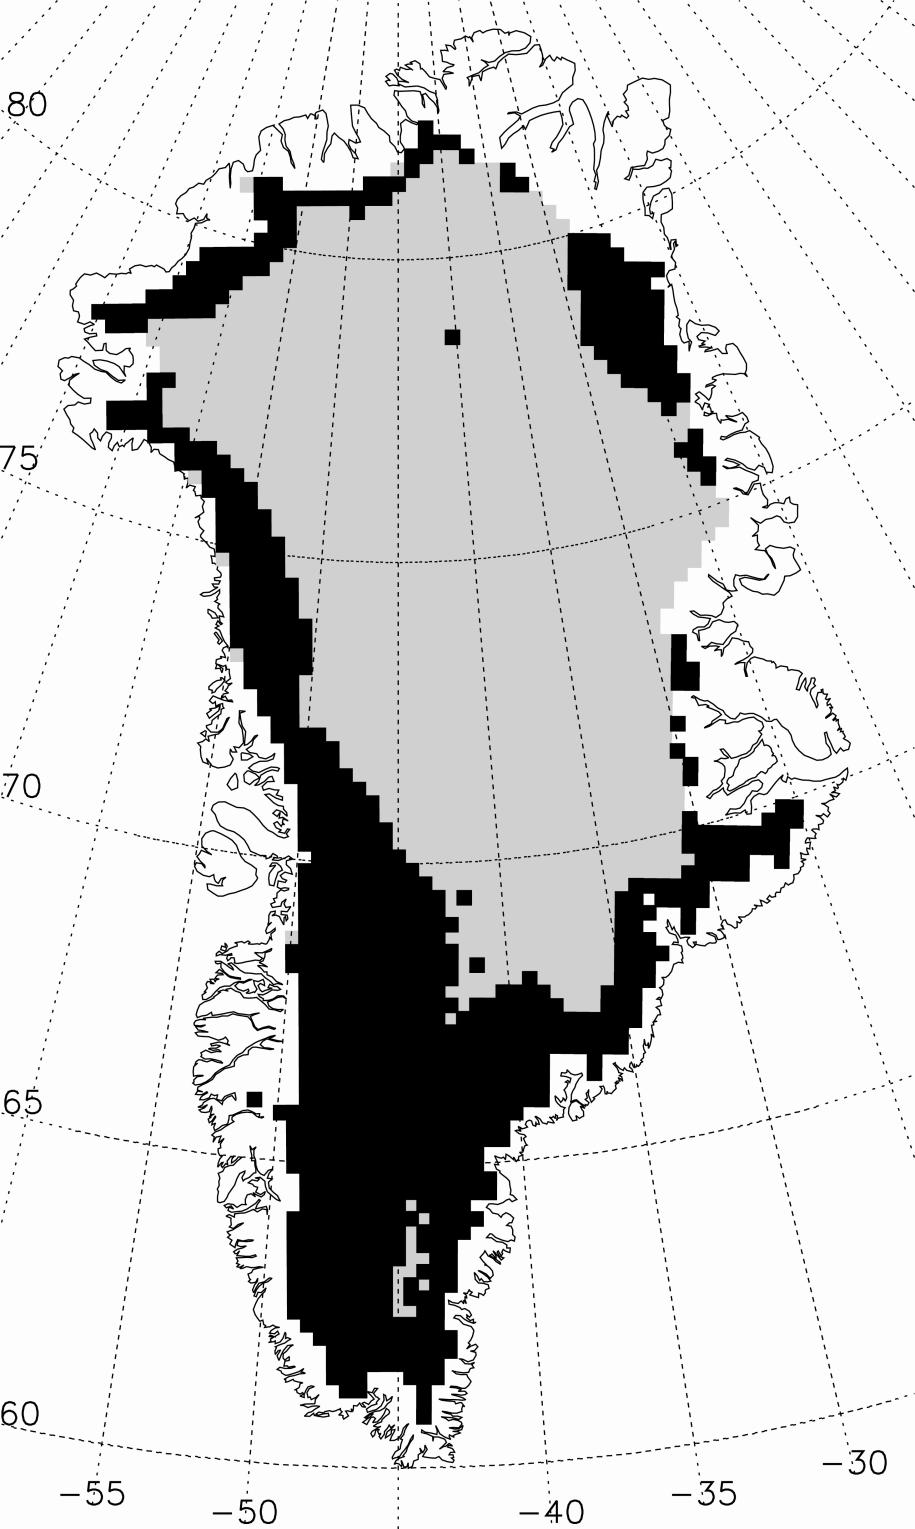 Surface melt extent (black areas) for the summer of 1999 based on satellite